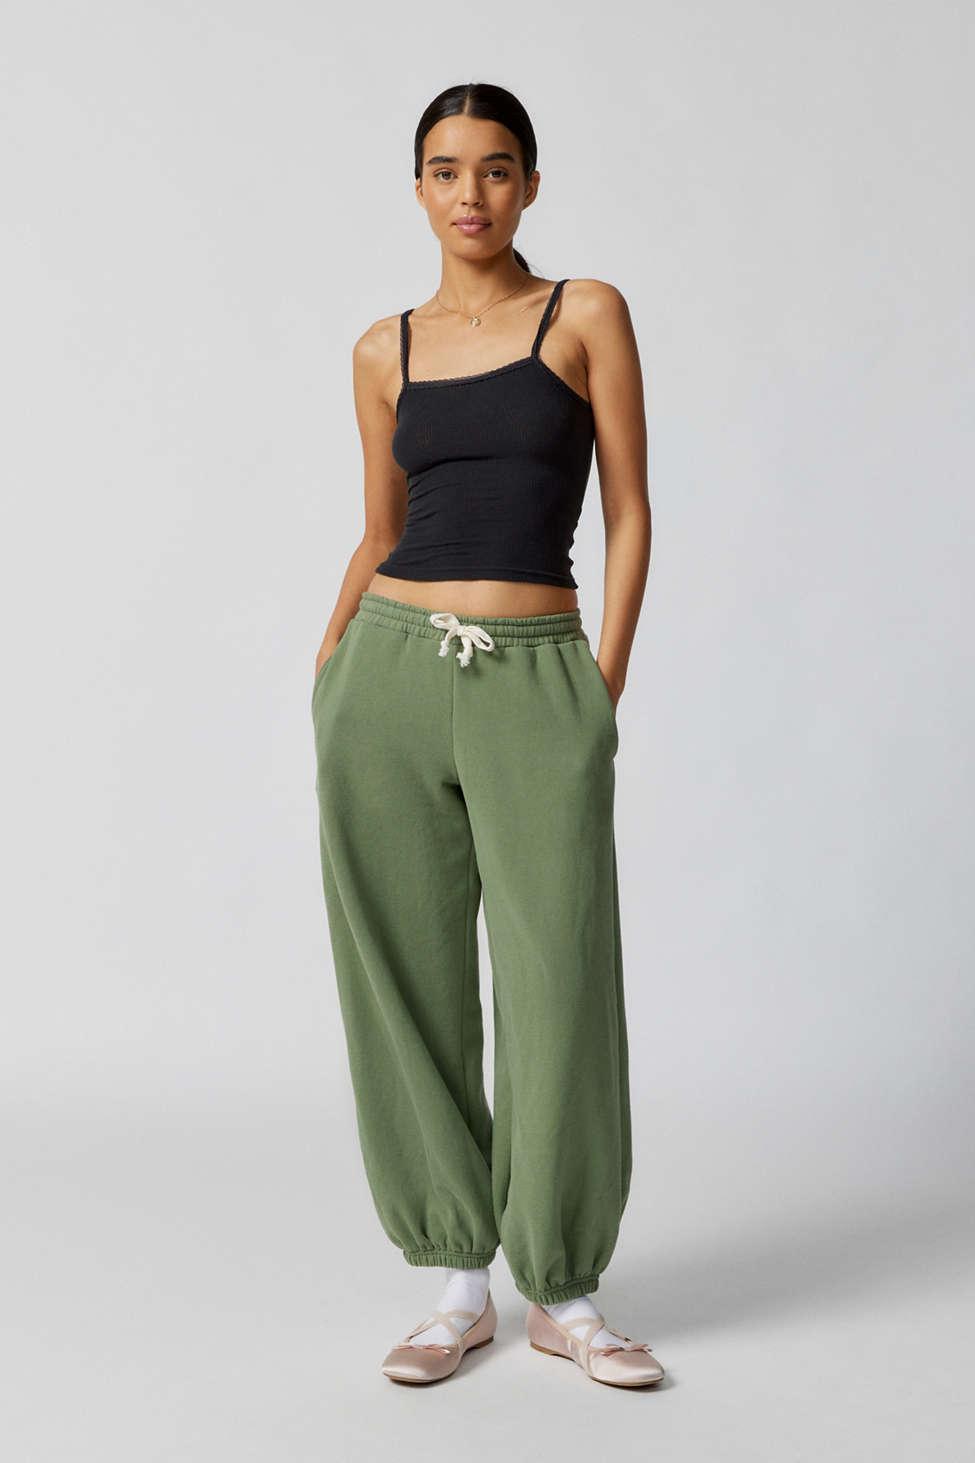 Out From Under Brenda Soft Jogger Sweatpant In Olive,at Urban